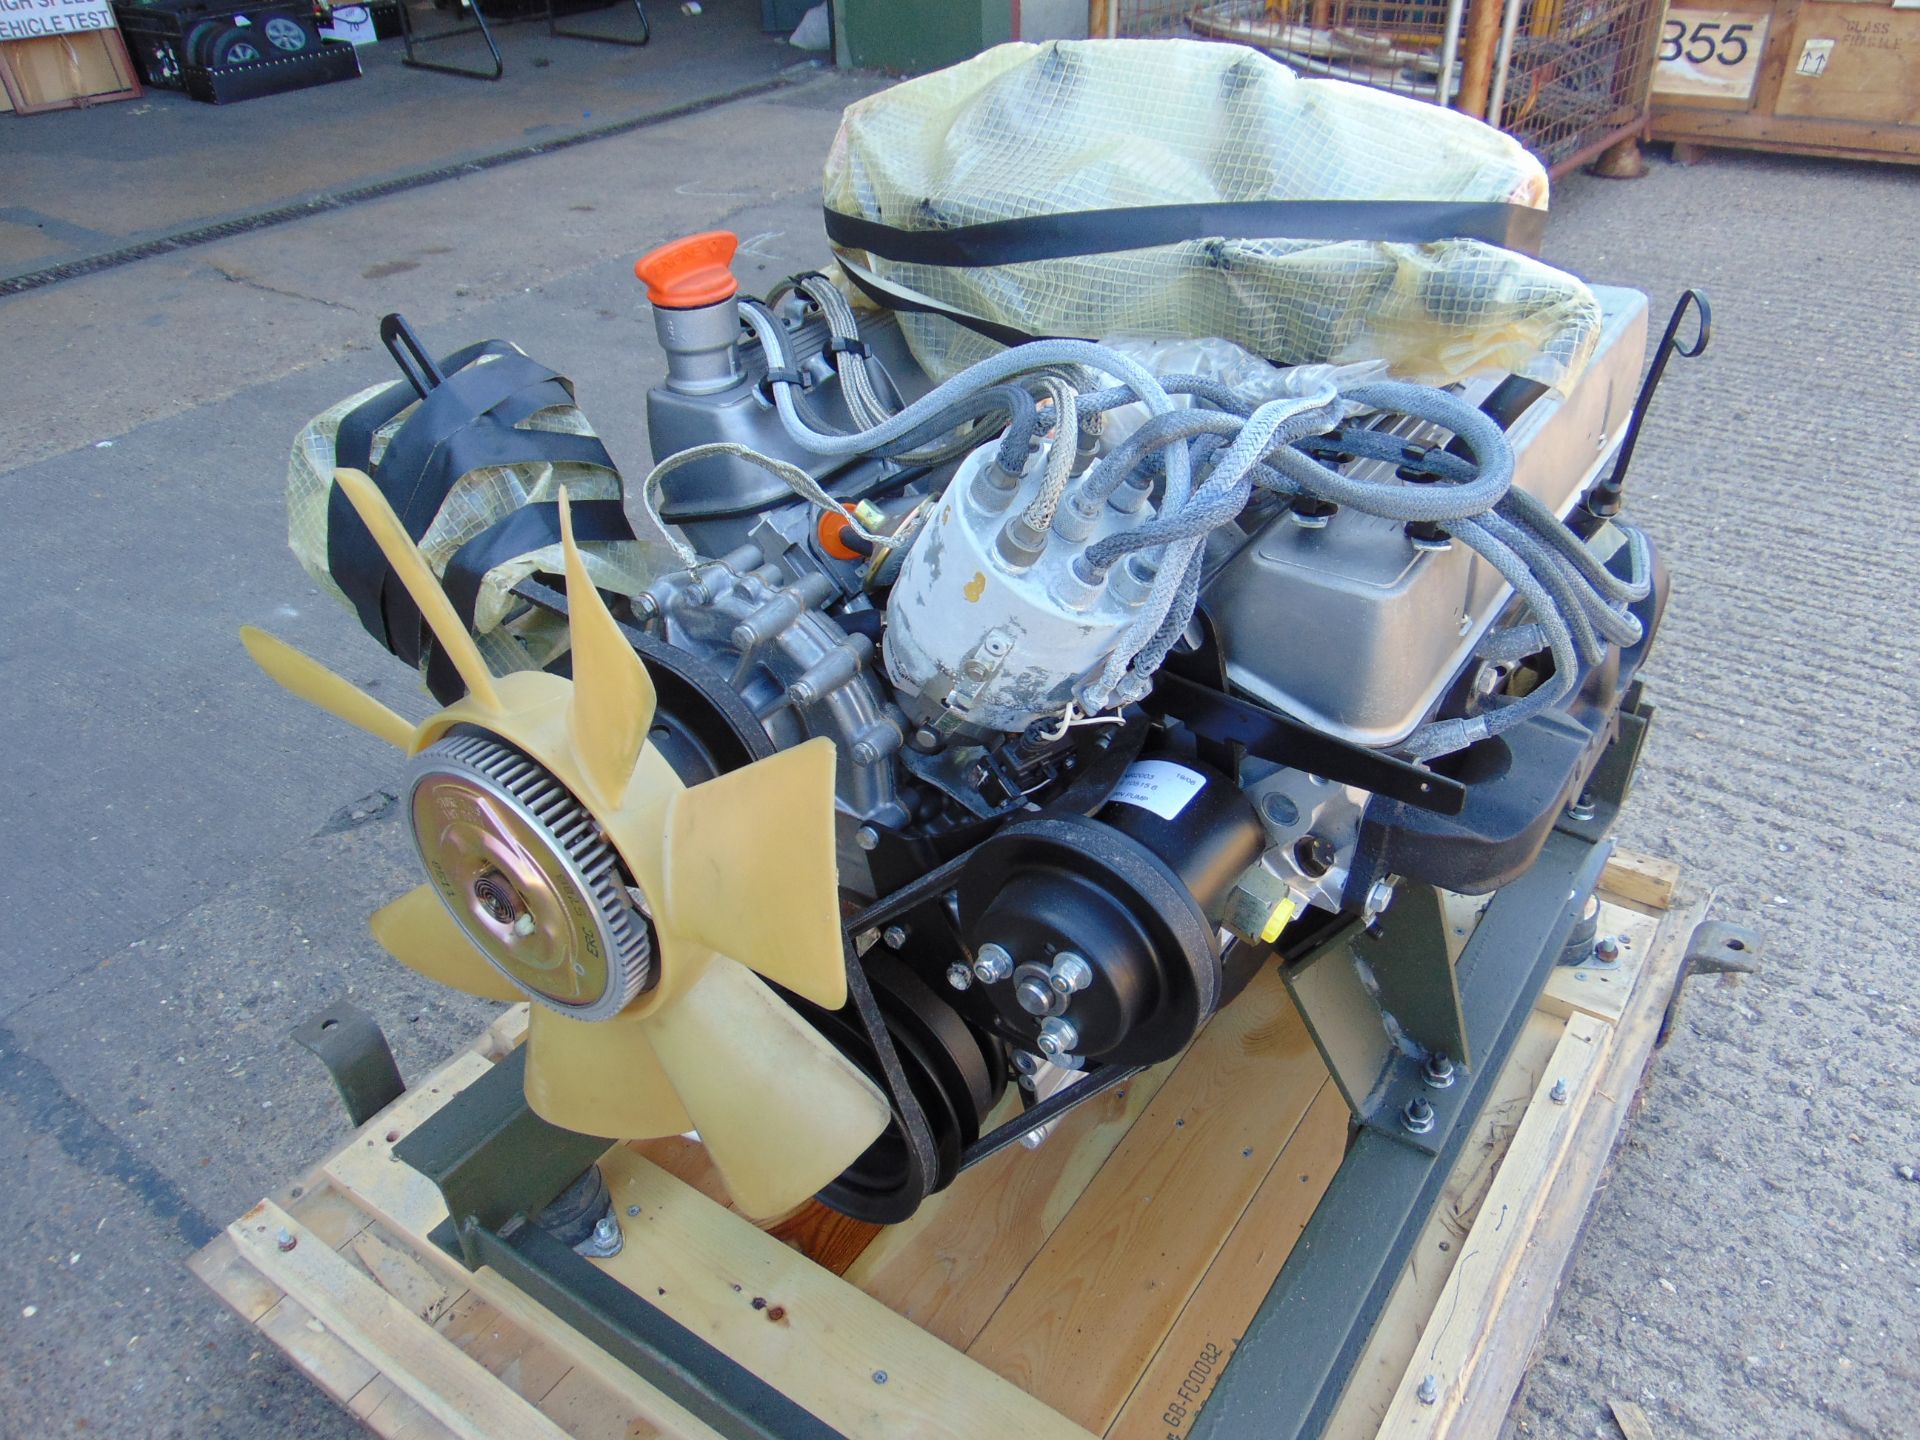 Fully Reconditioned Land Rover V8 Engine c/w all Accessories, as shown in Crate etc - Image 2 of 21